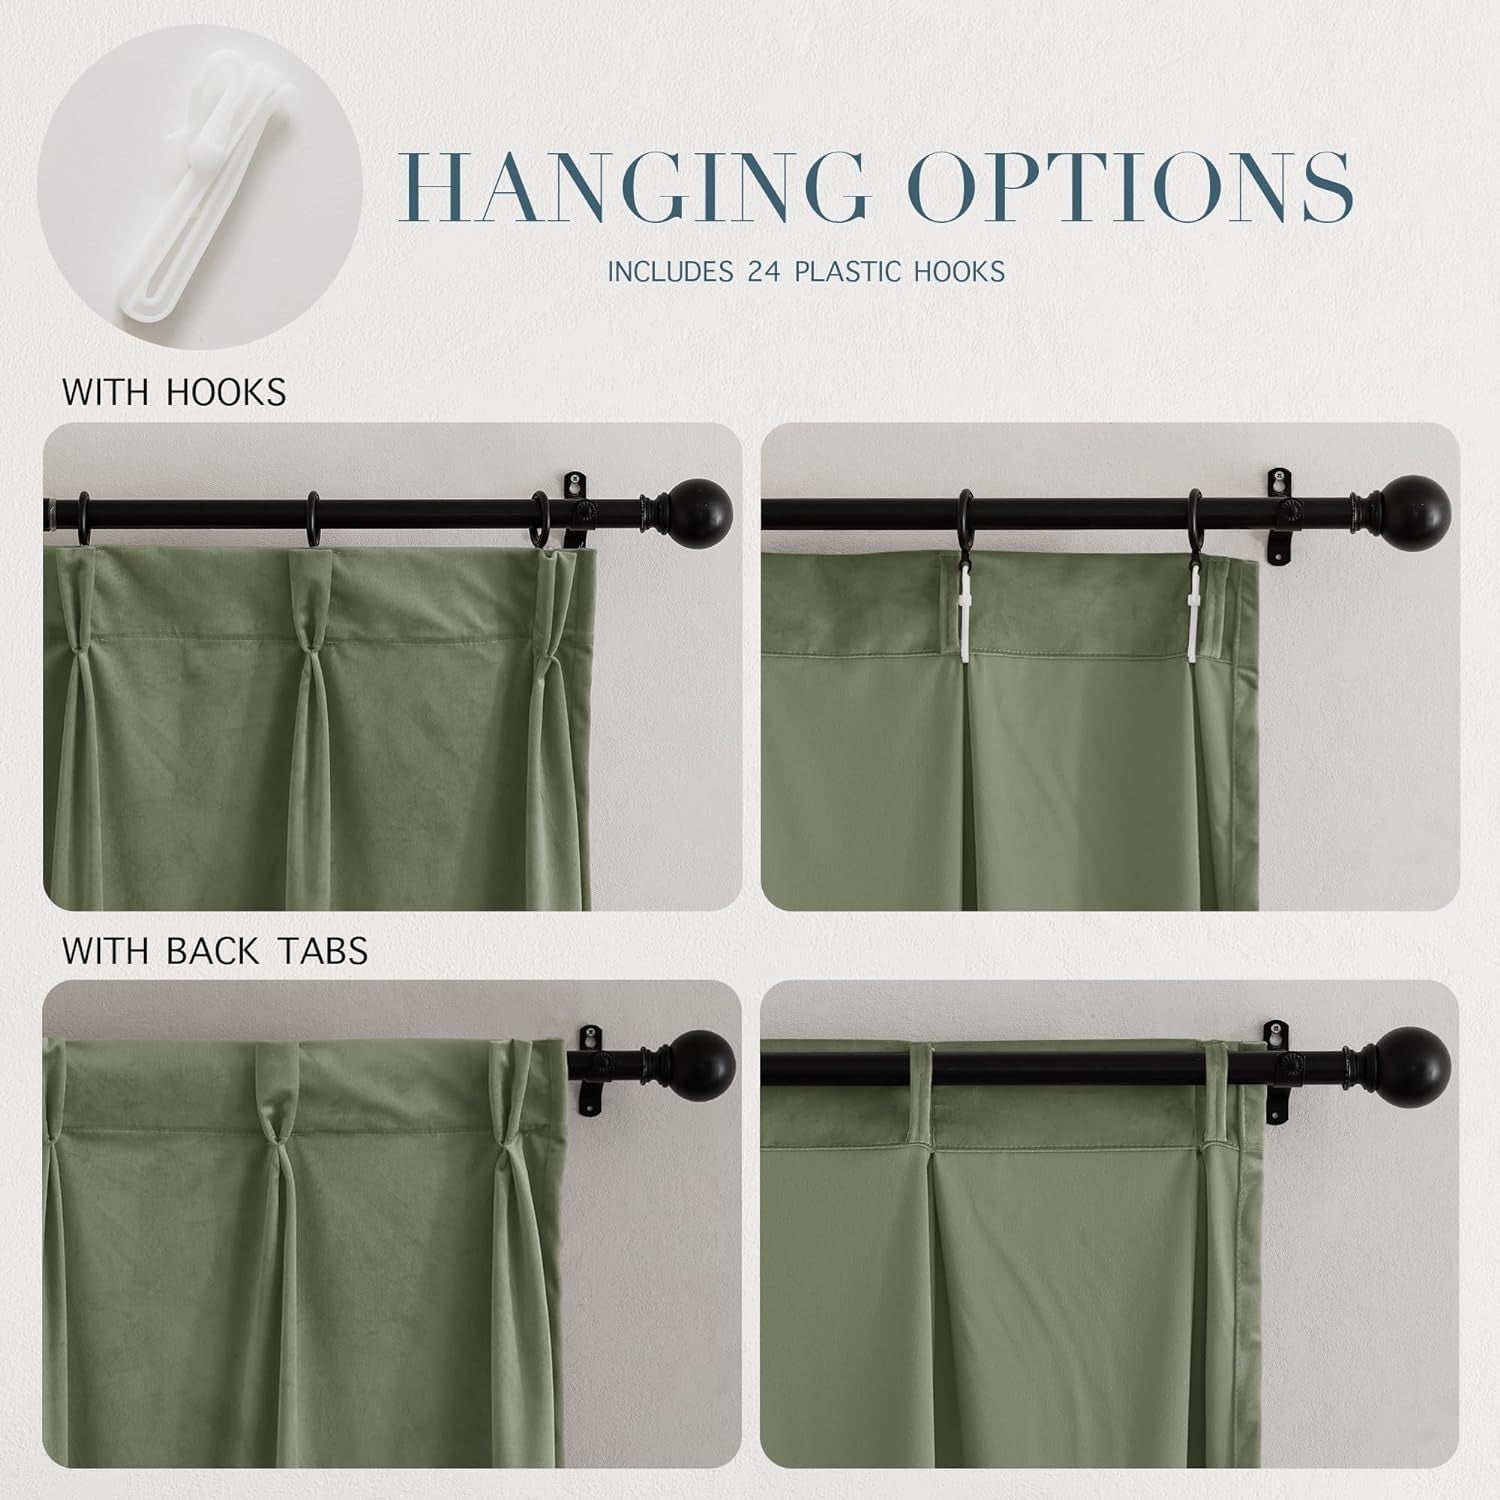 RYB HOME Pinch Pleated Velvet Curtains 84 Inches for Sliding Glass Door, Thermal Insulated Room Darkening Pleated Drapes for Bedroom Living Room, Sage Green, W34 X L84 Inches, 2 Panels  RYB HOME   